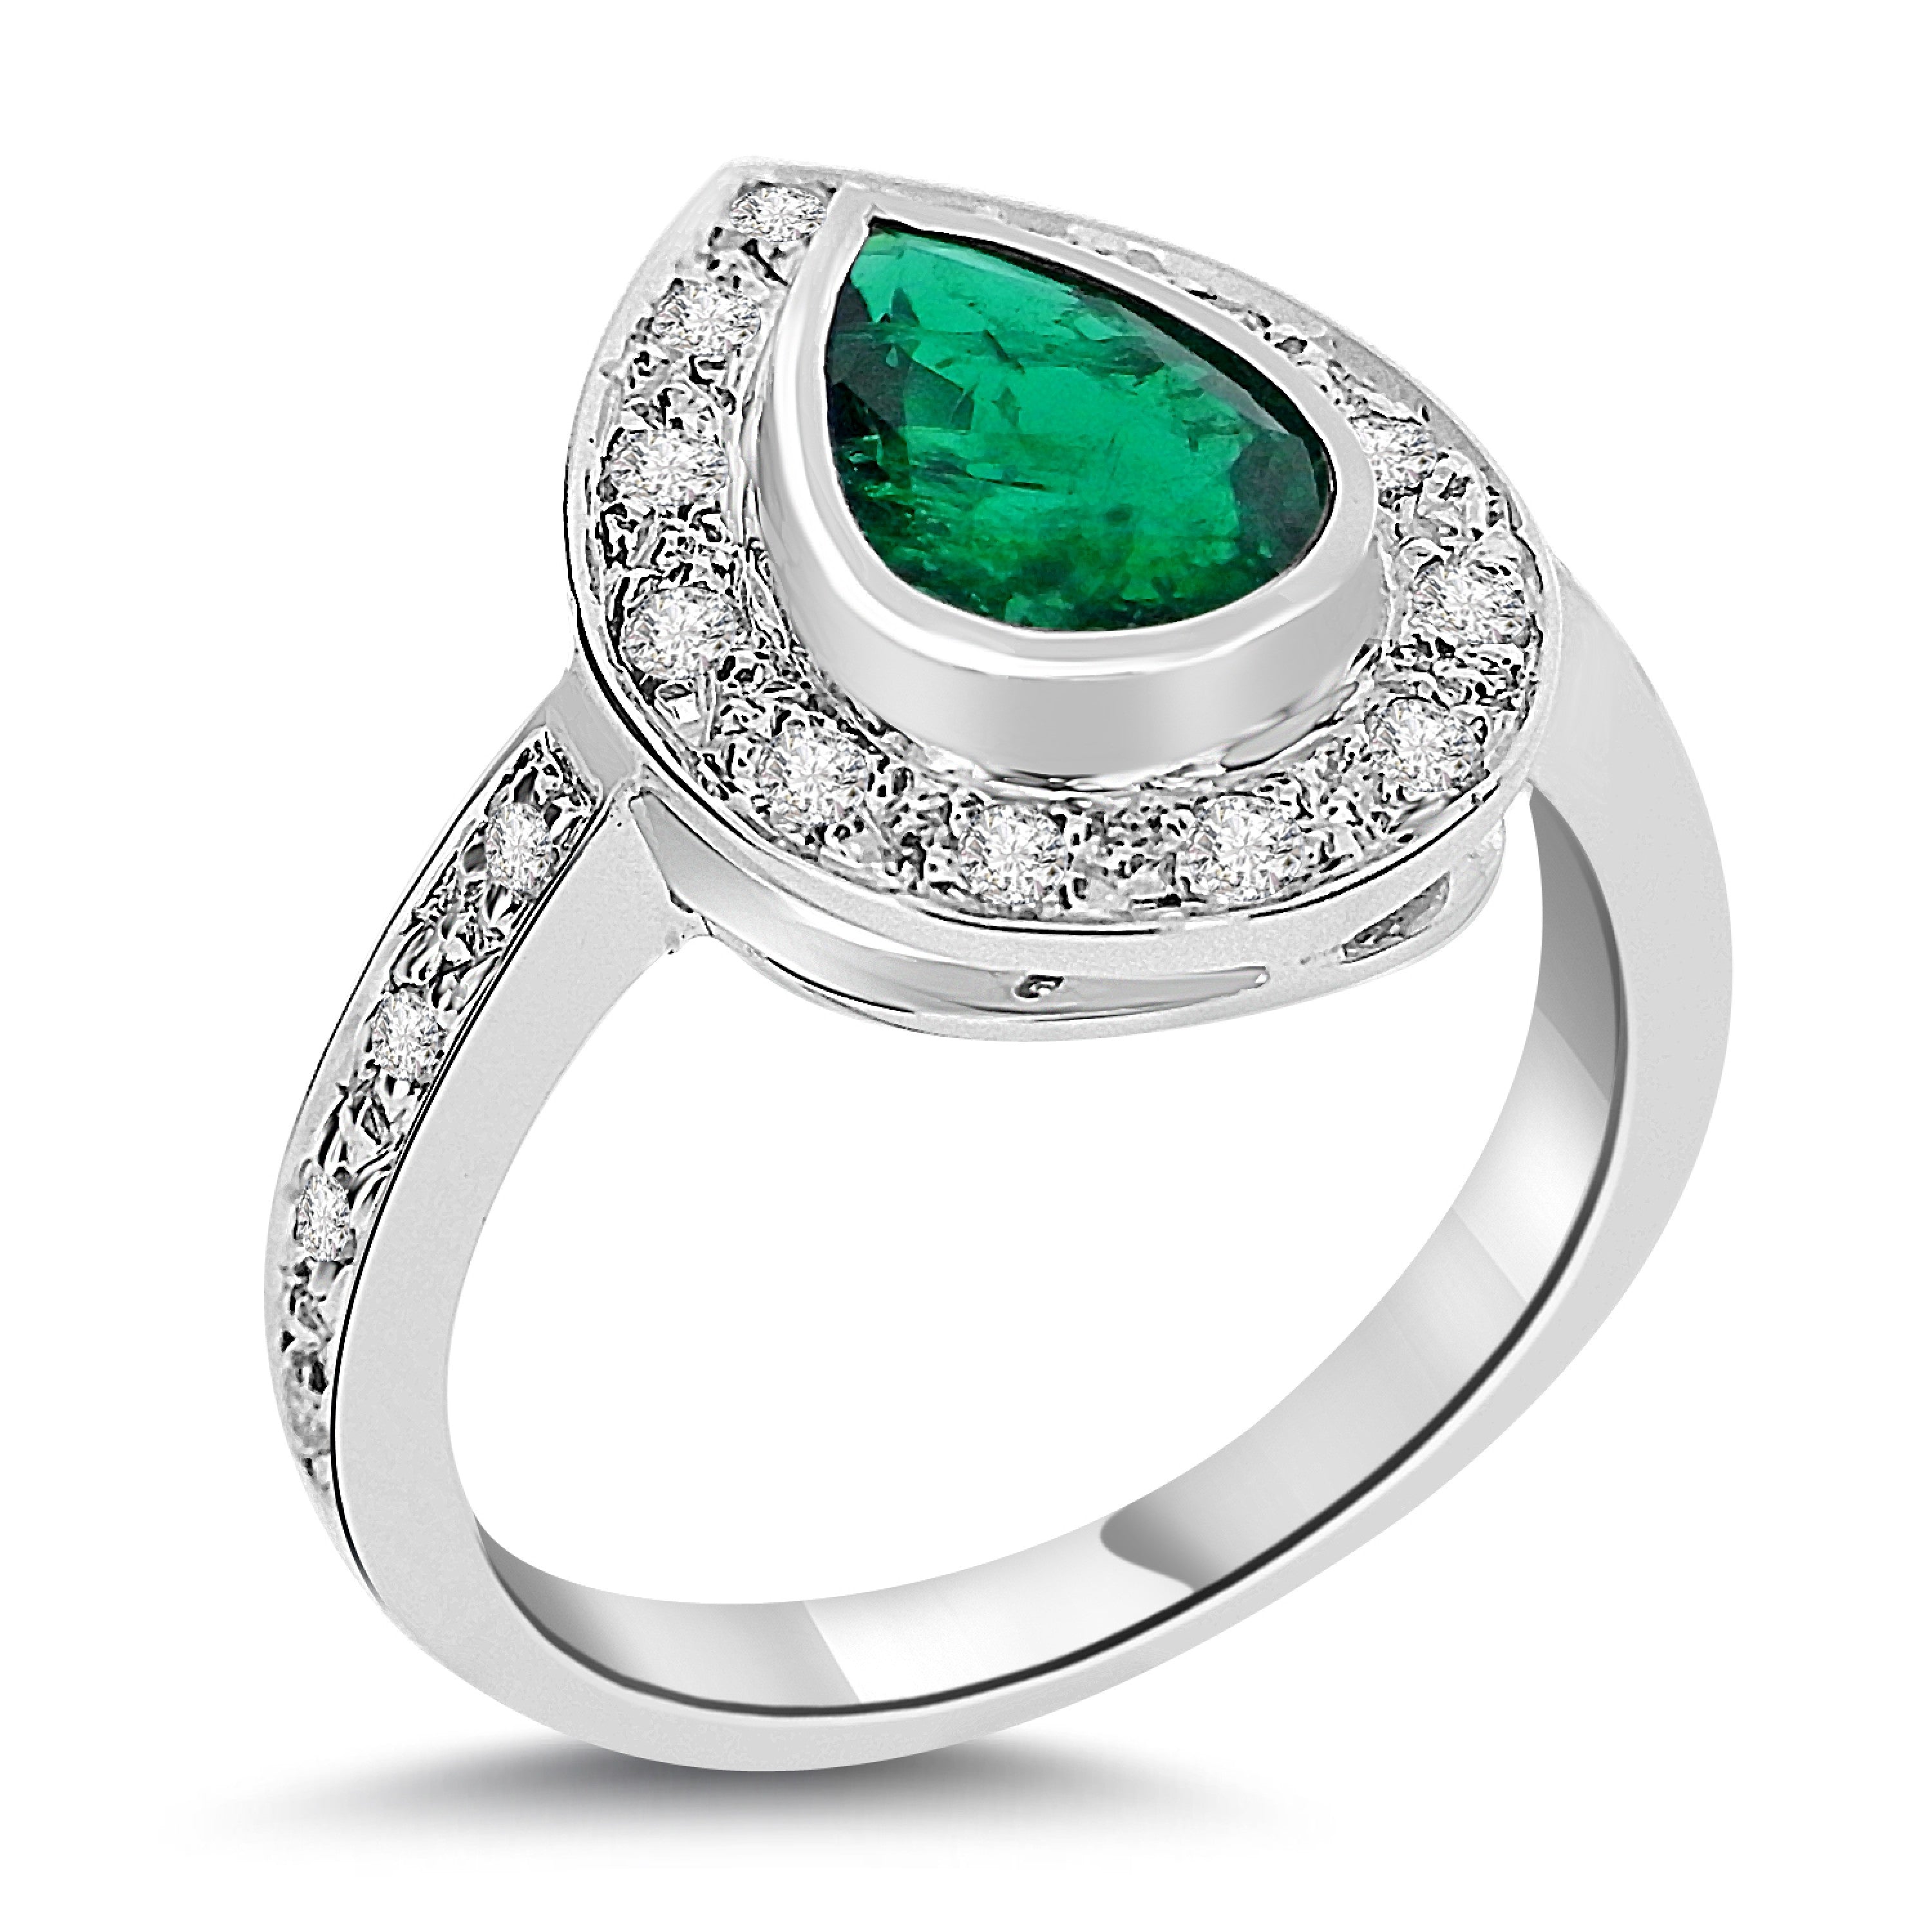 PEAR CUT EMERALD AND DIAMOND ENGAGEMENT RING